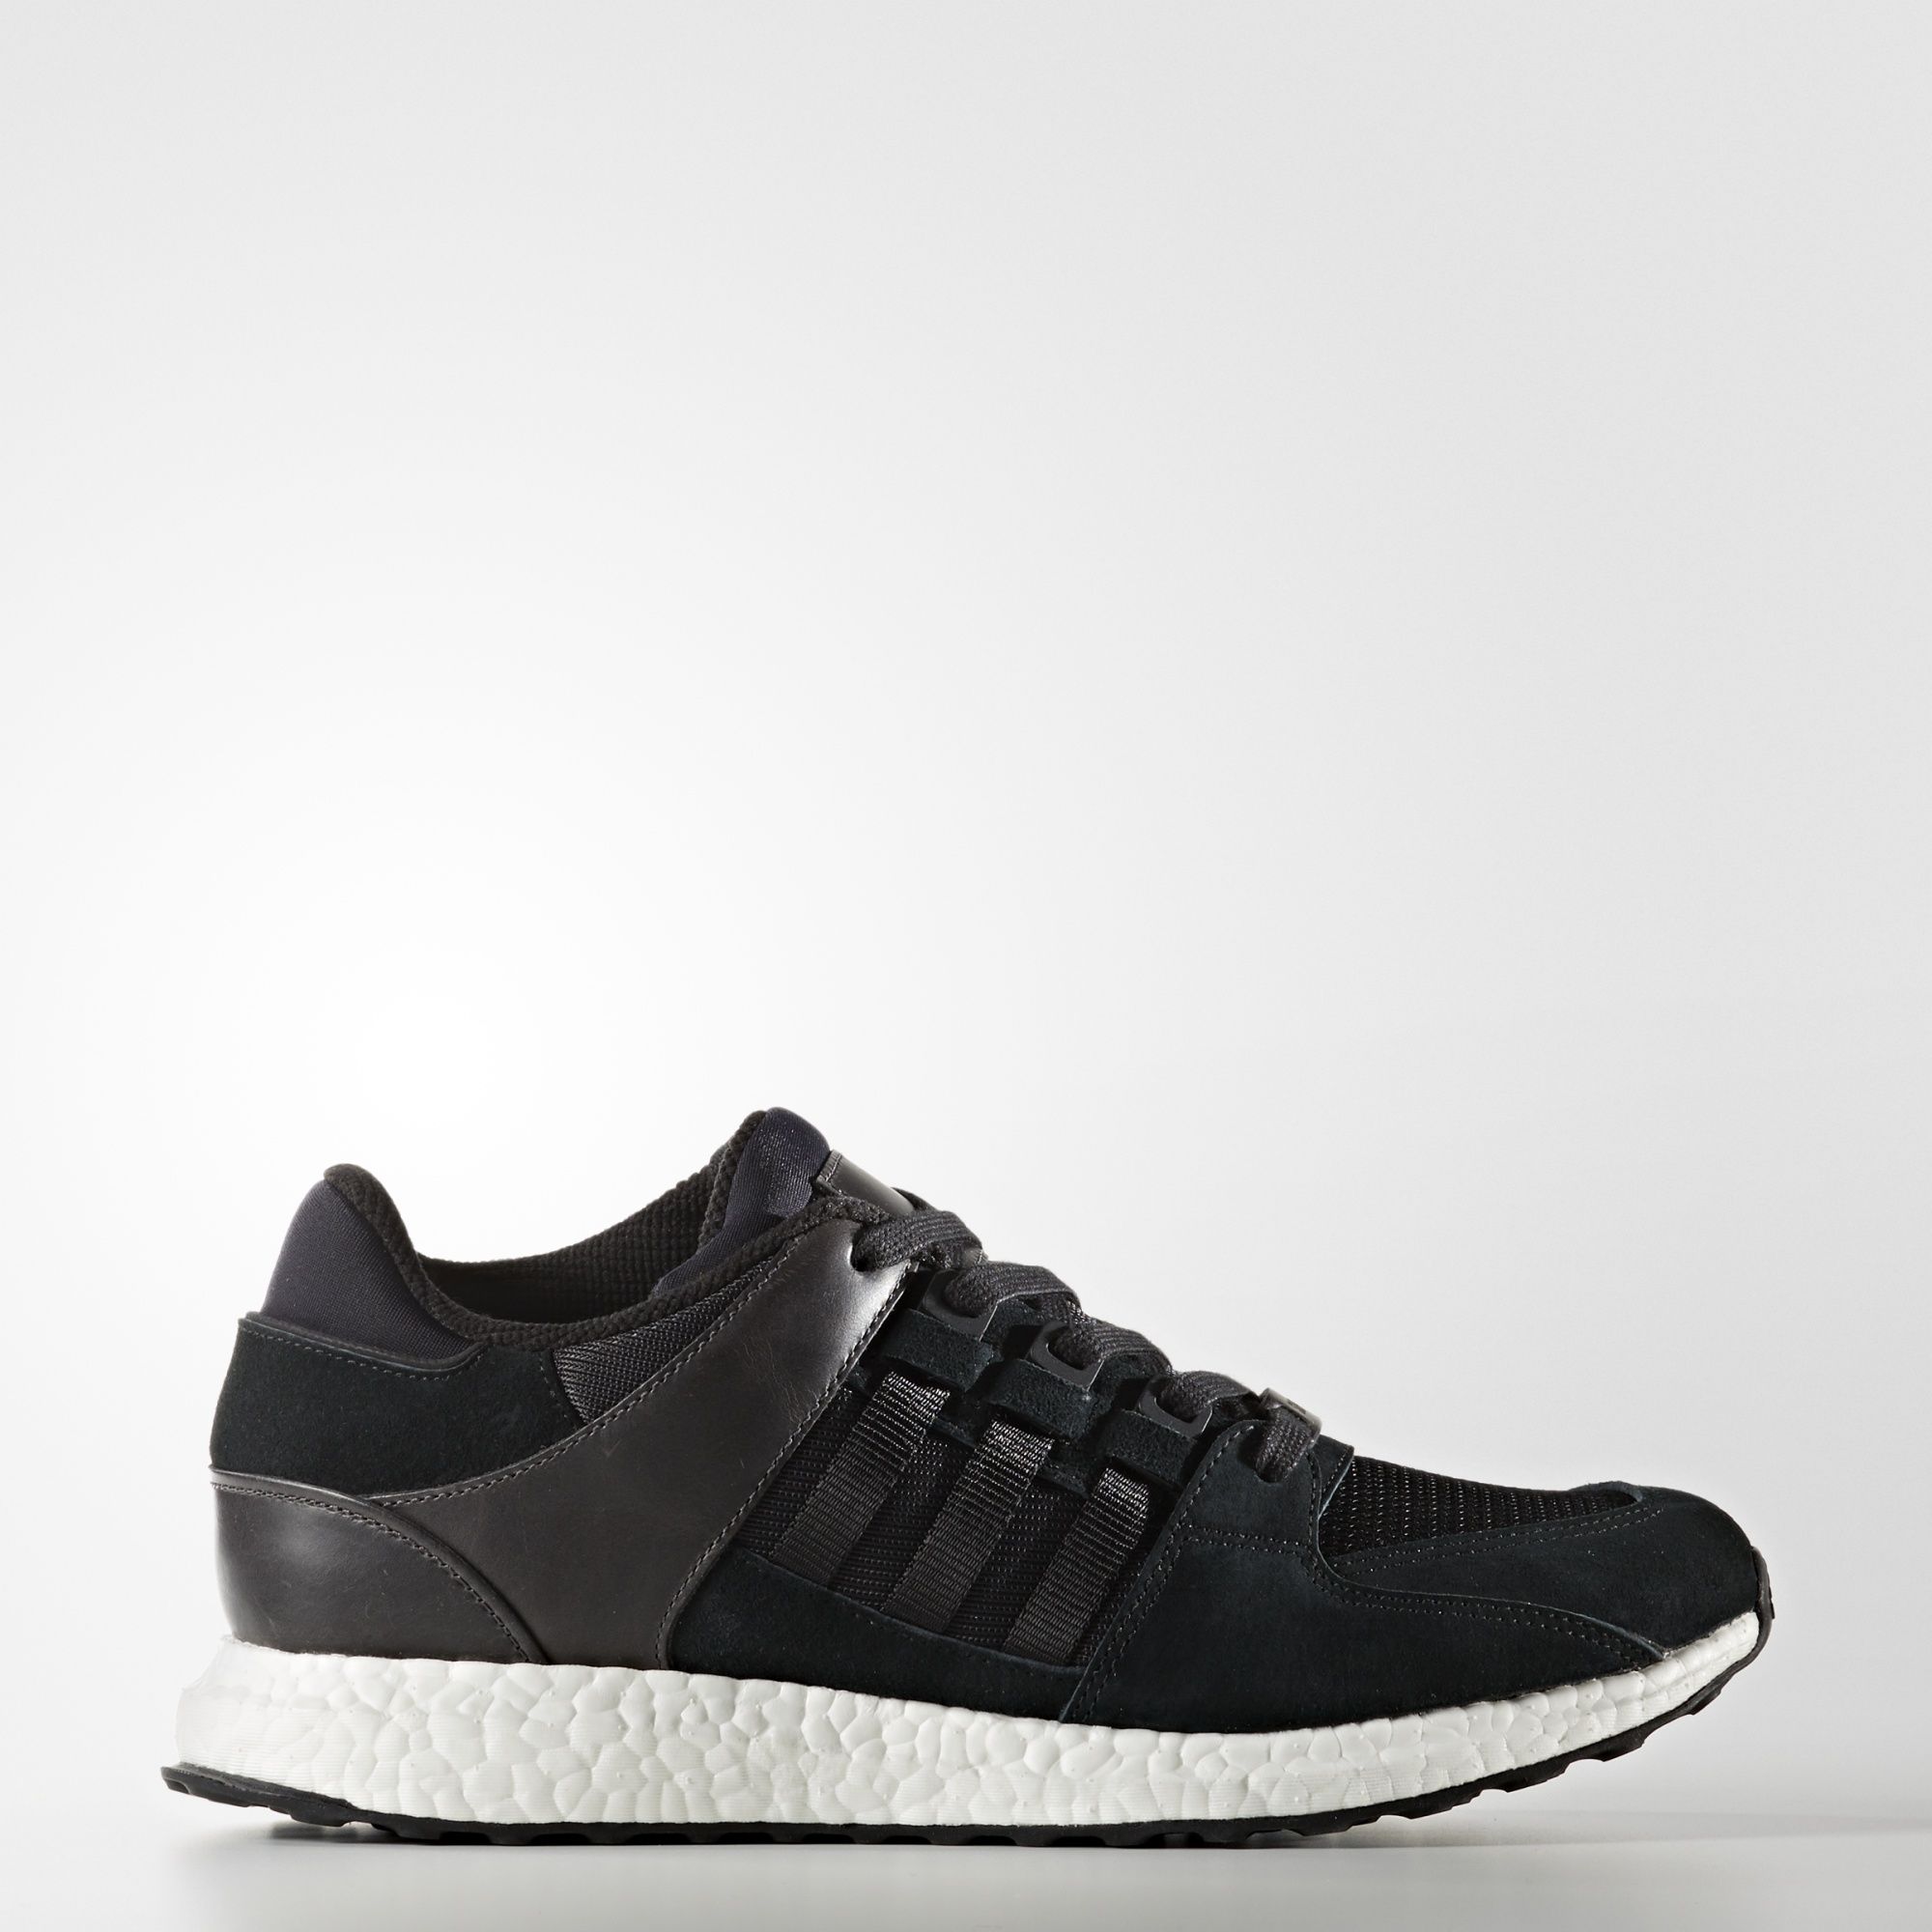 adidas-eqt-support-ultra-boost-milled-leather-pack-2